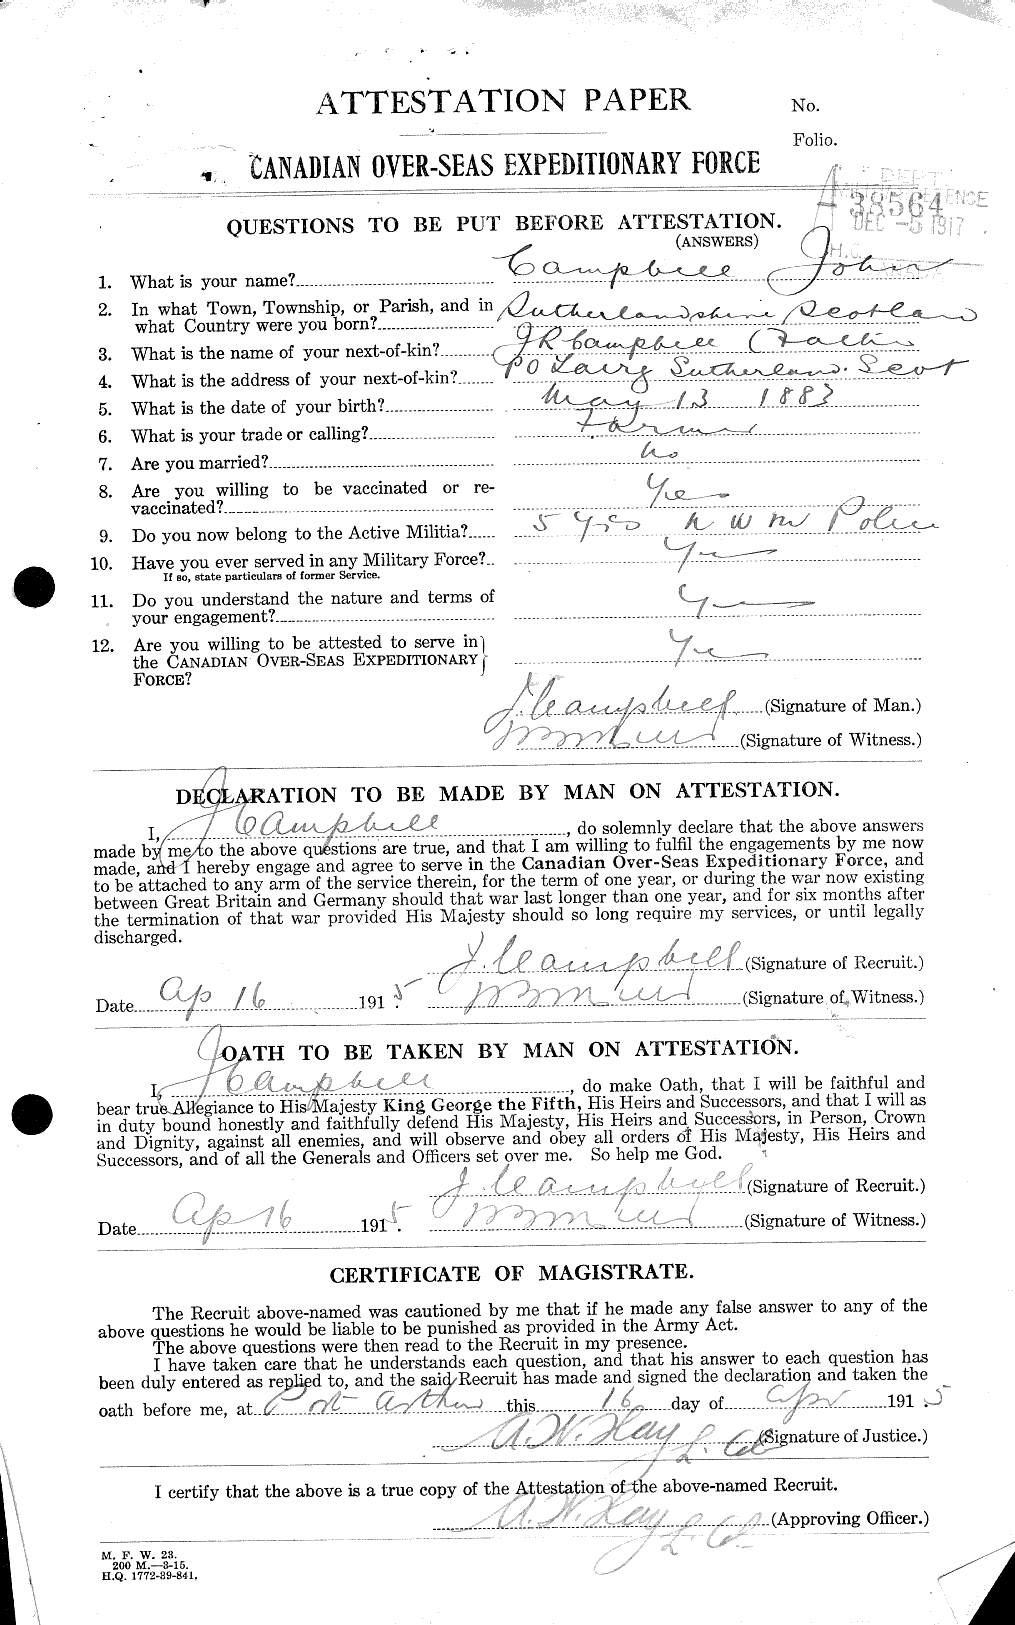 Personnel Records of the First World War - CEF 006799c